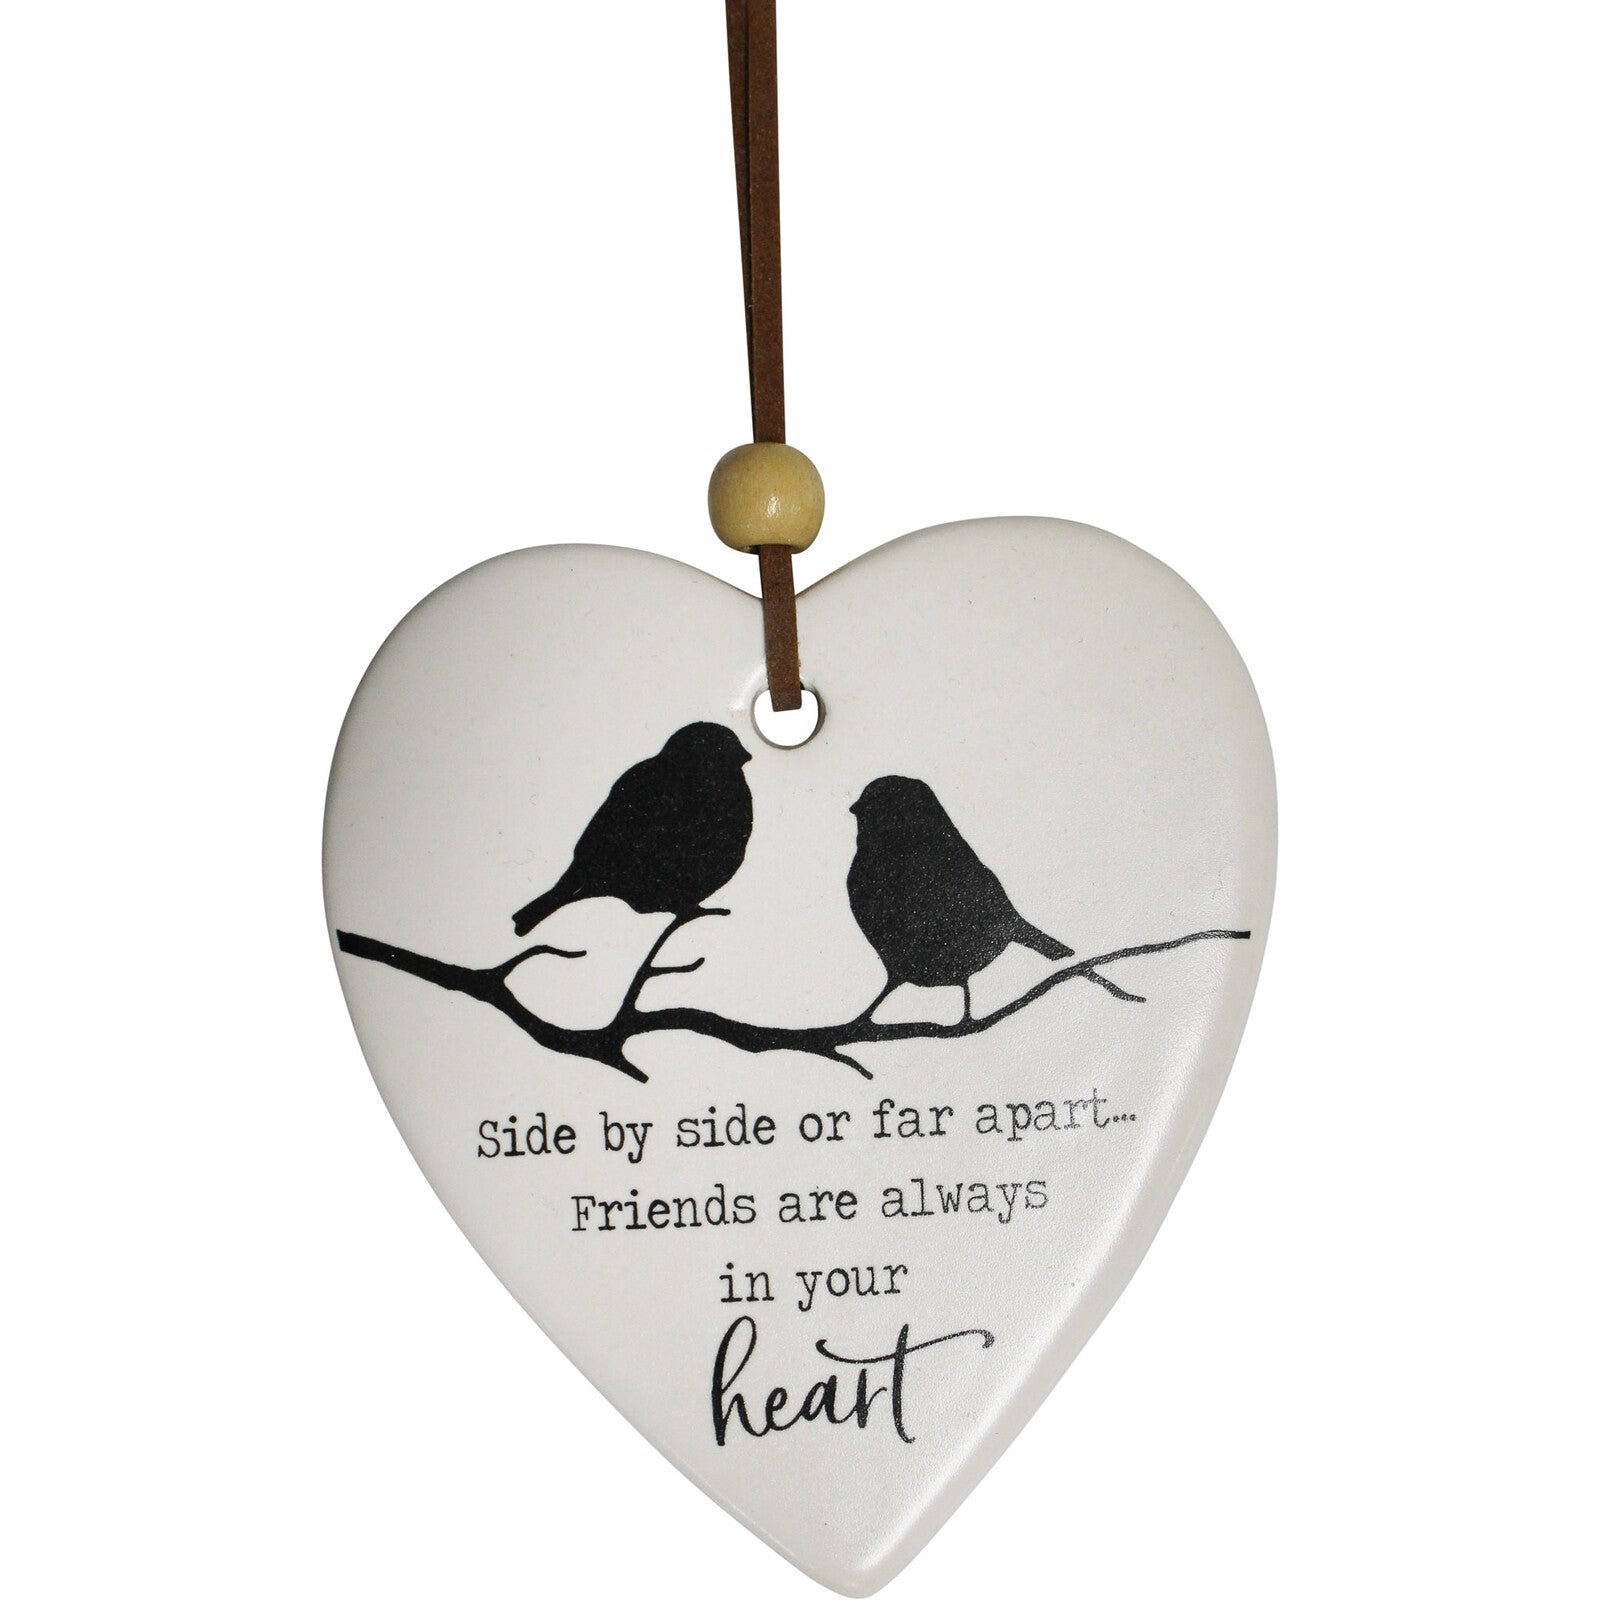 'Side By Side or Far Apart.... Friends are always in your heart' Ceramic Heart